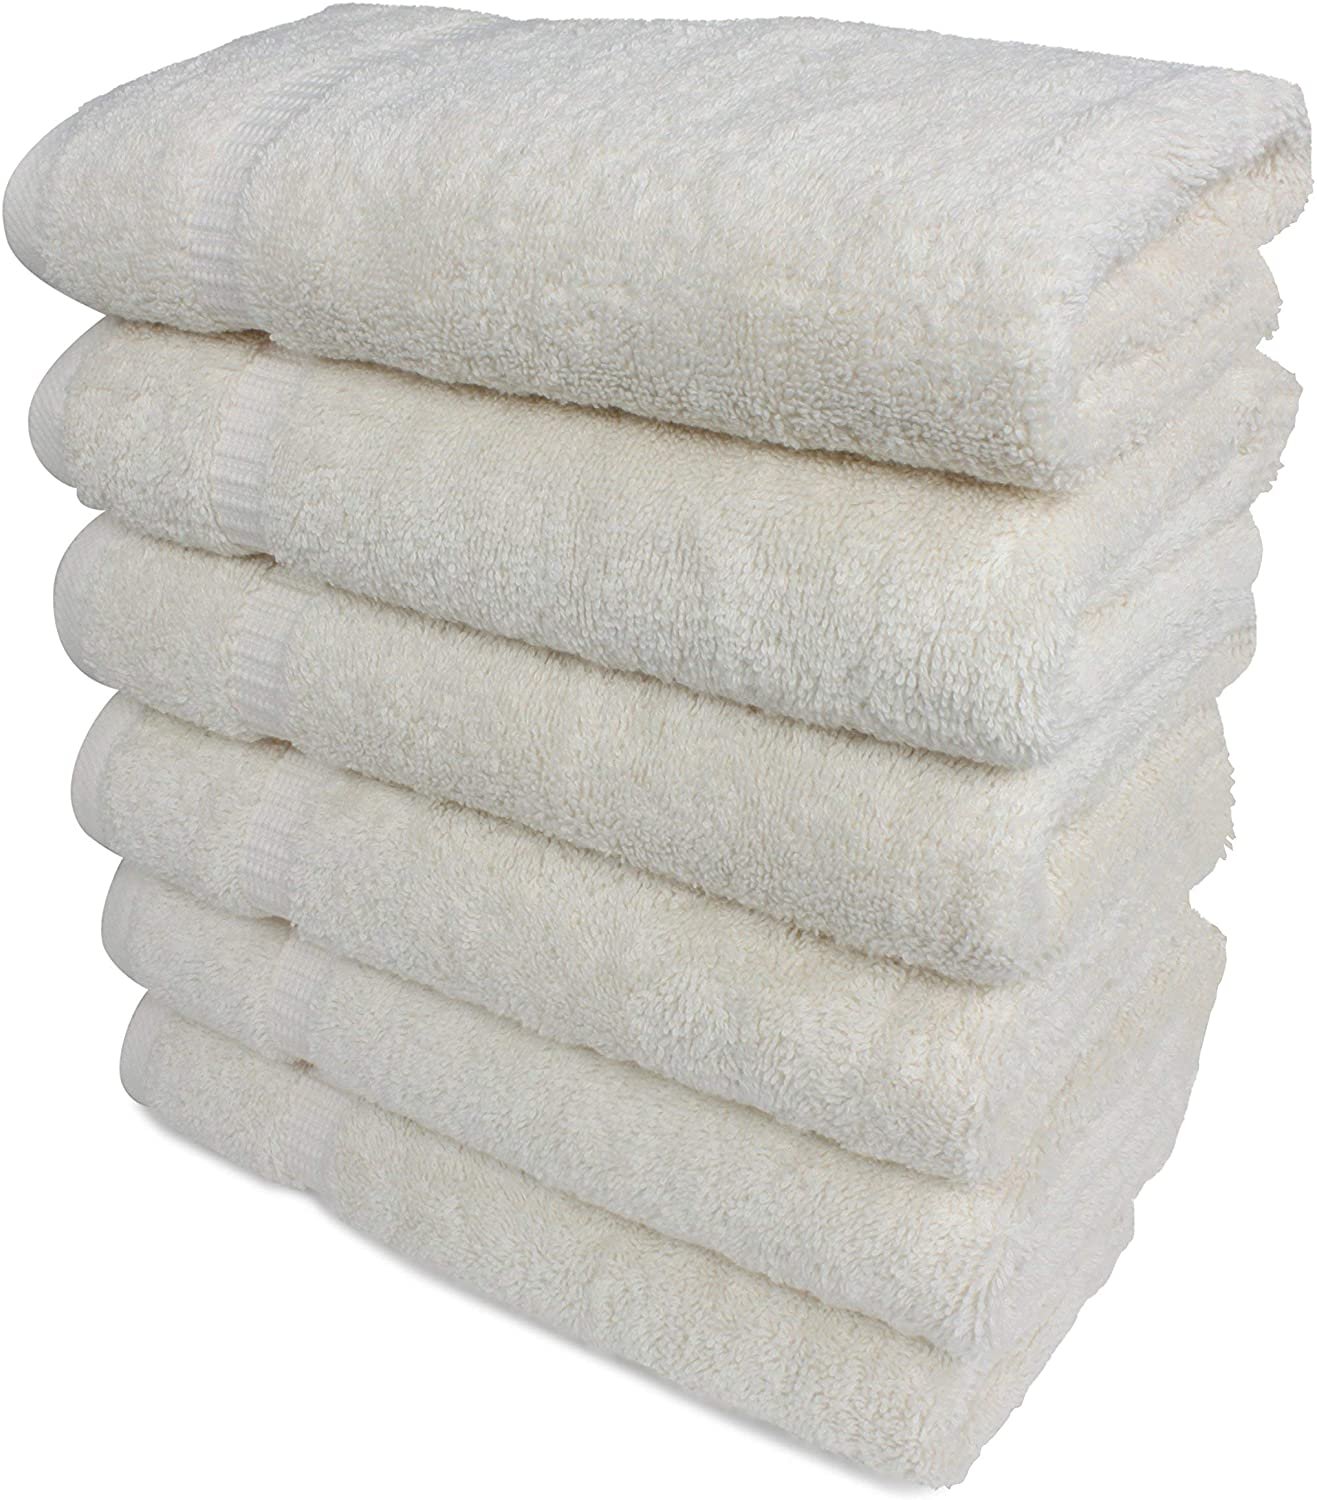 White Classic Luxury 100% Cotton Hand Towels Set of 6 - 16x30 Multi-Color